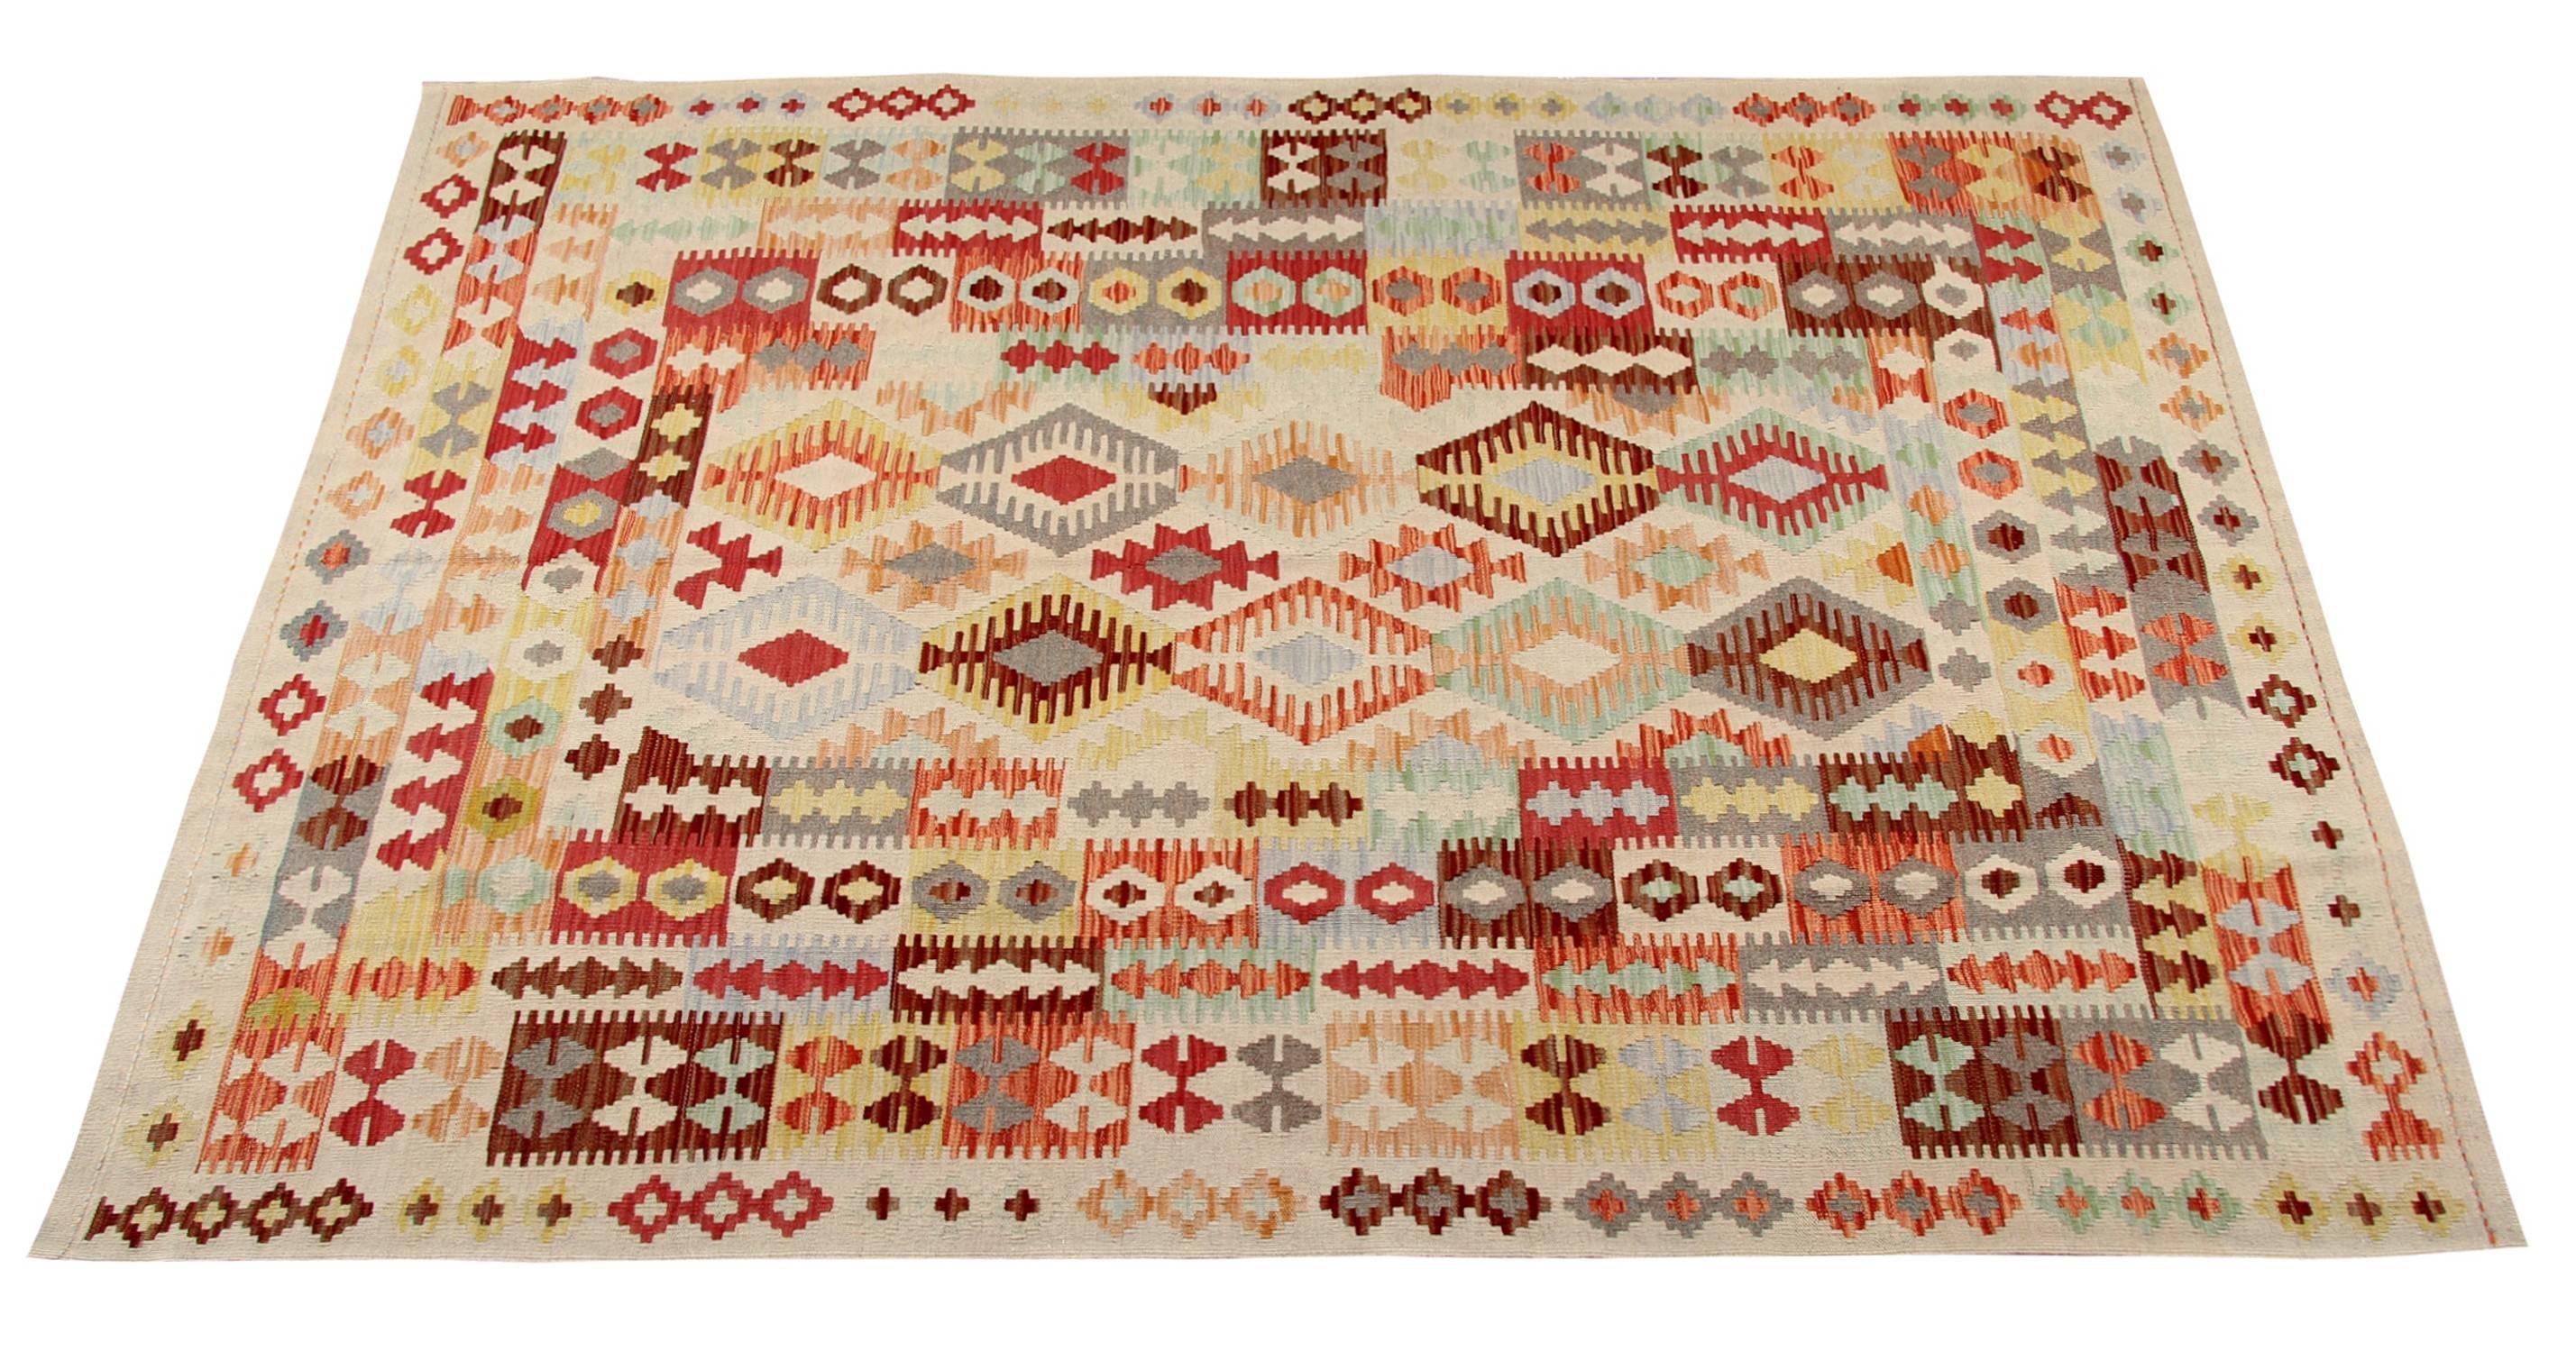 The Kilim shown is iconically called 'Mexican fiesta' (literally 'Mexican party') due to the variated colors on a cream background. The red, light blue, orange, yellow and green colors render this carpet particularly alive. The Kilim rug is